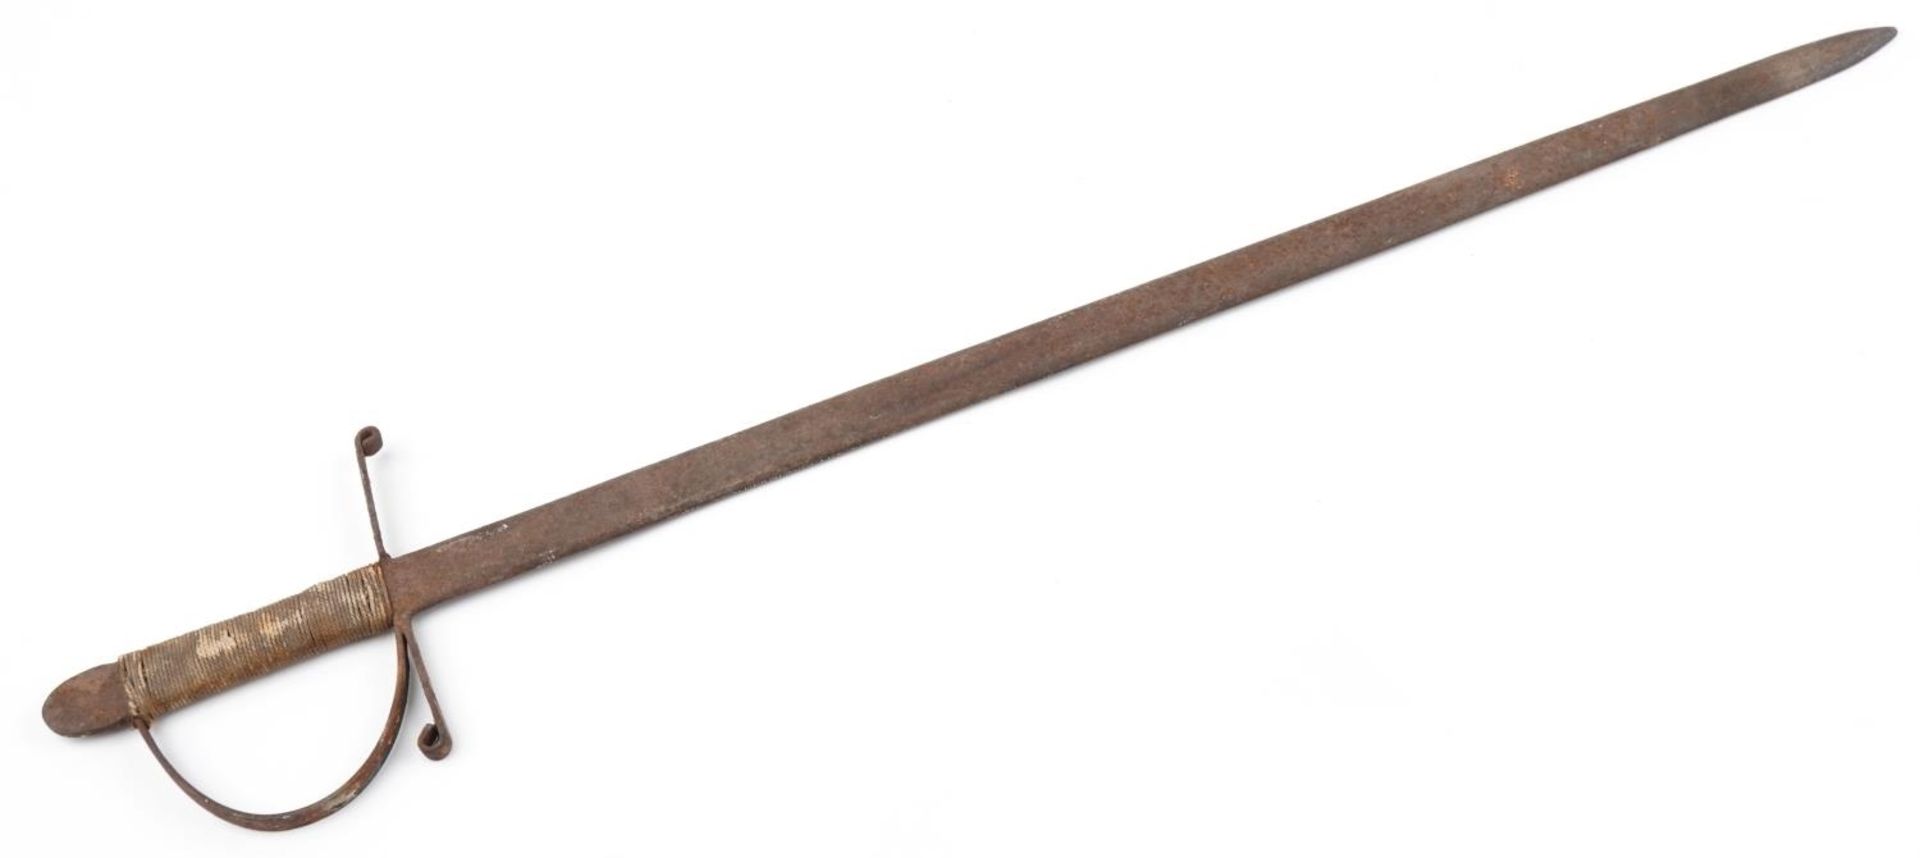 Continental iron sword, 91cm in length : For further information on this lot please visit - Image 3 of 3